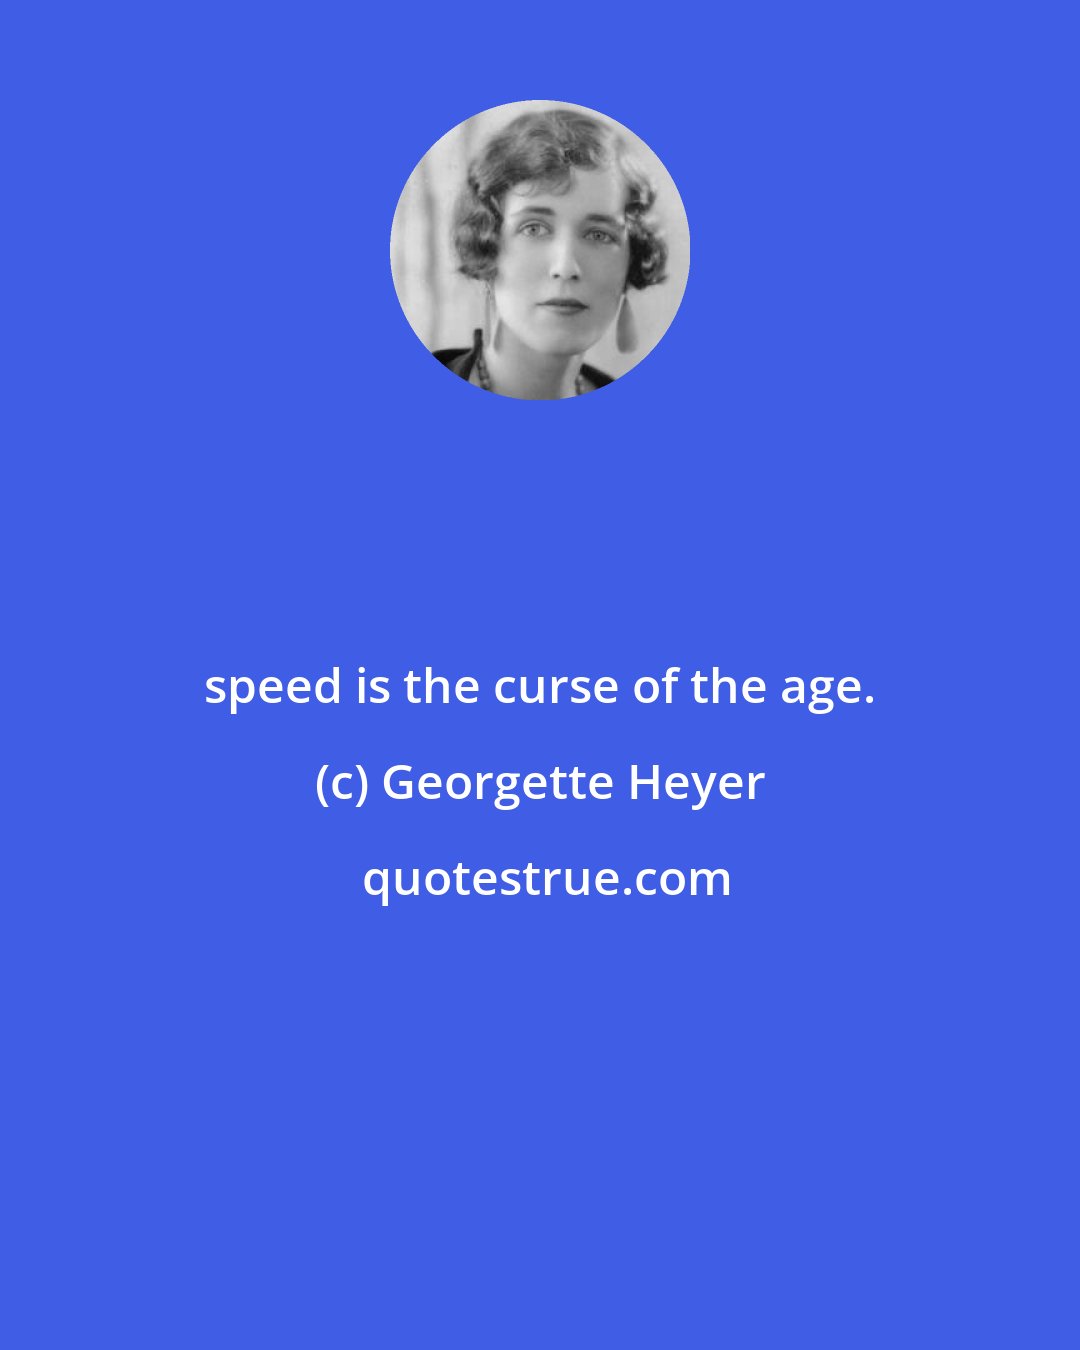 Georgette Heyer: speed is the curse of the age.